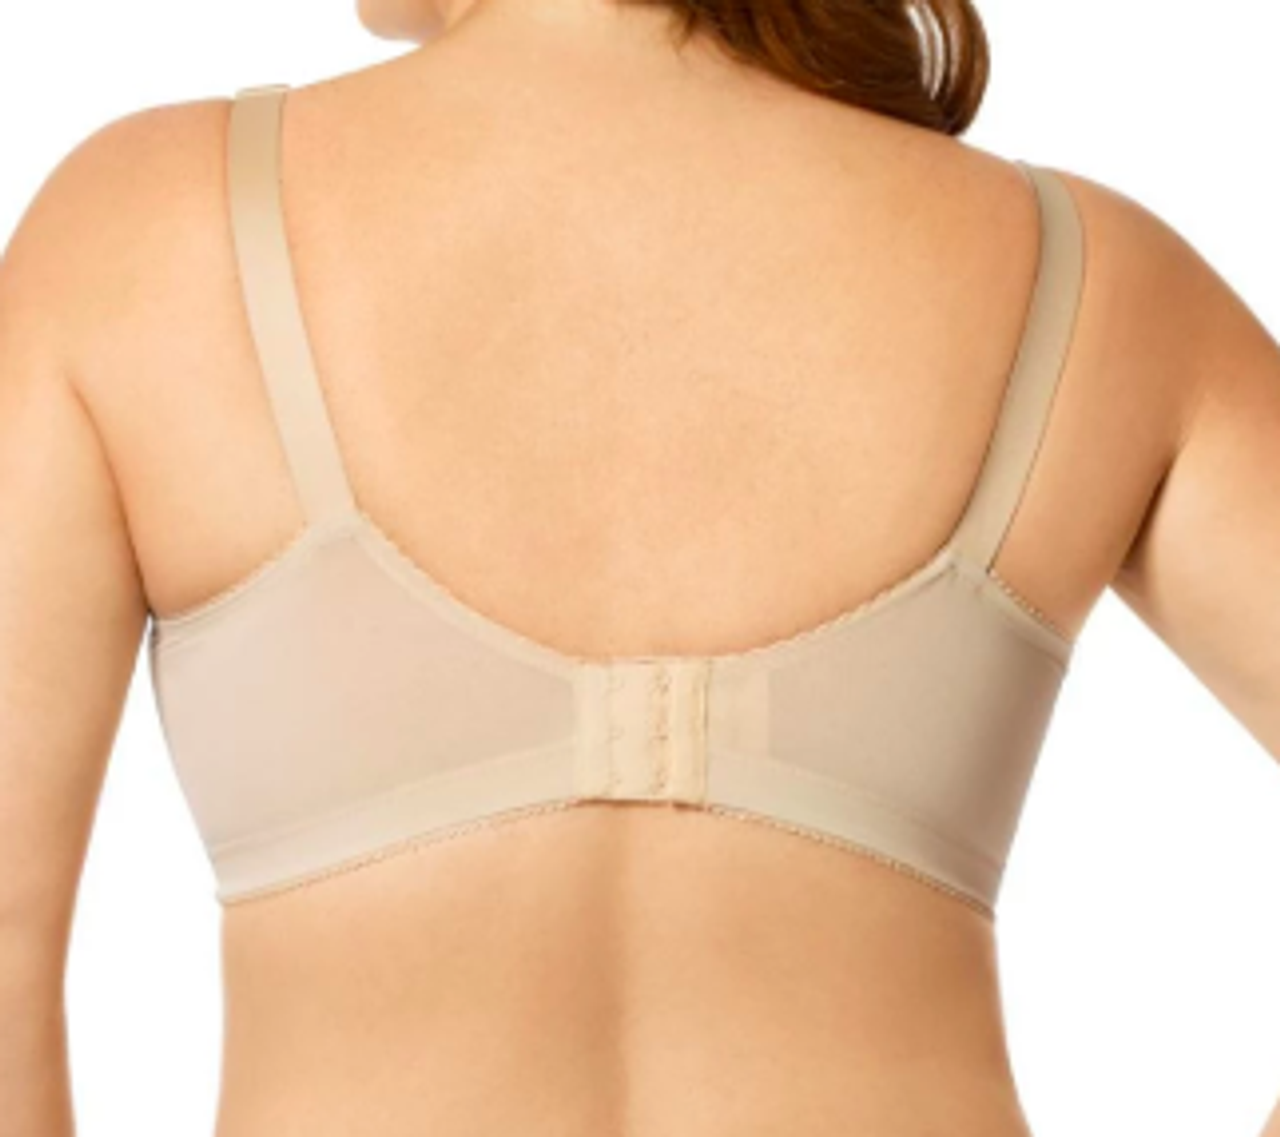 Elila Lace Softcup Bra in Nude